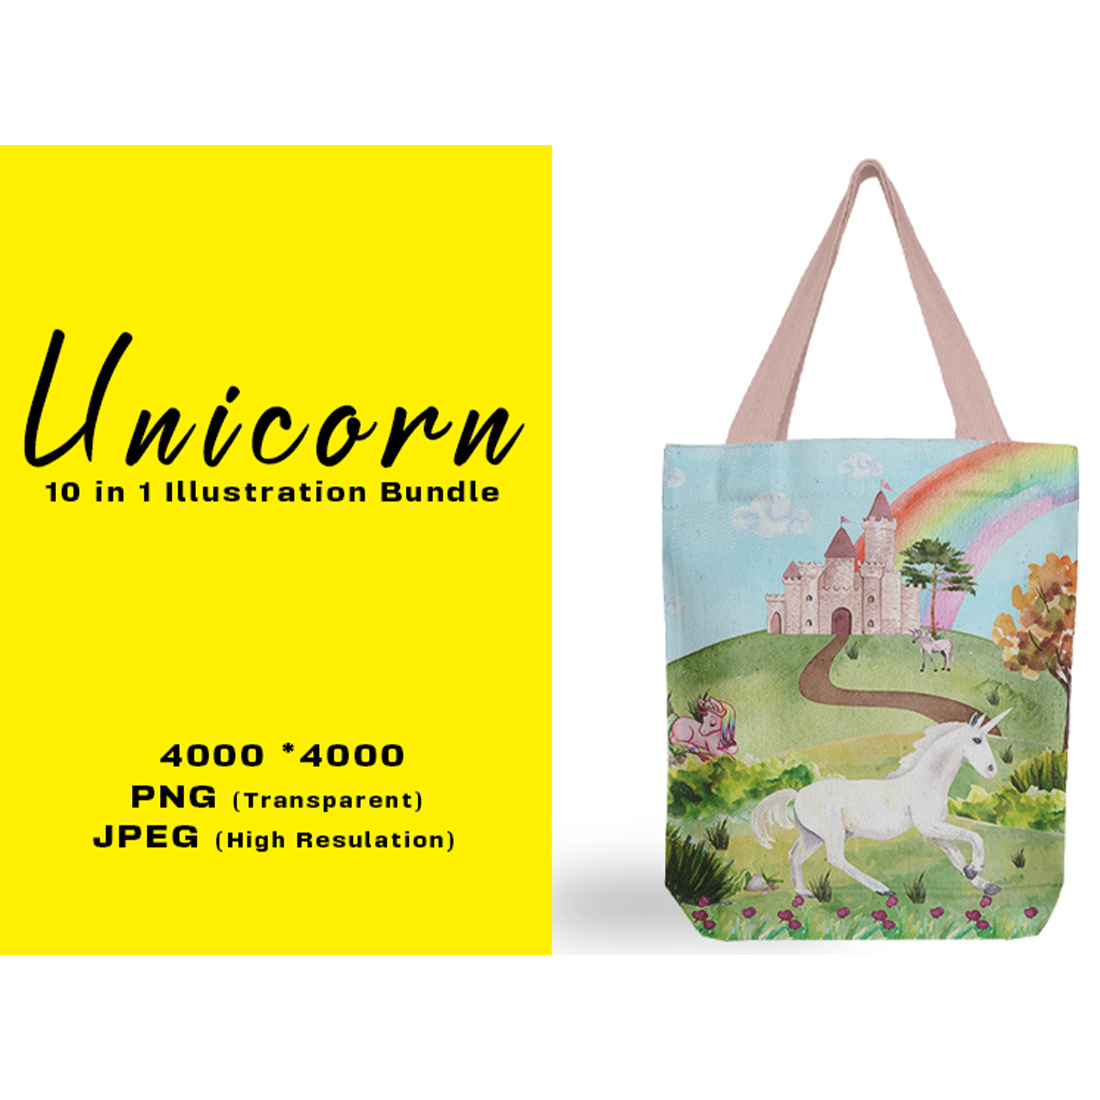 Picture of bag with exquisite unicorn print